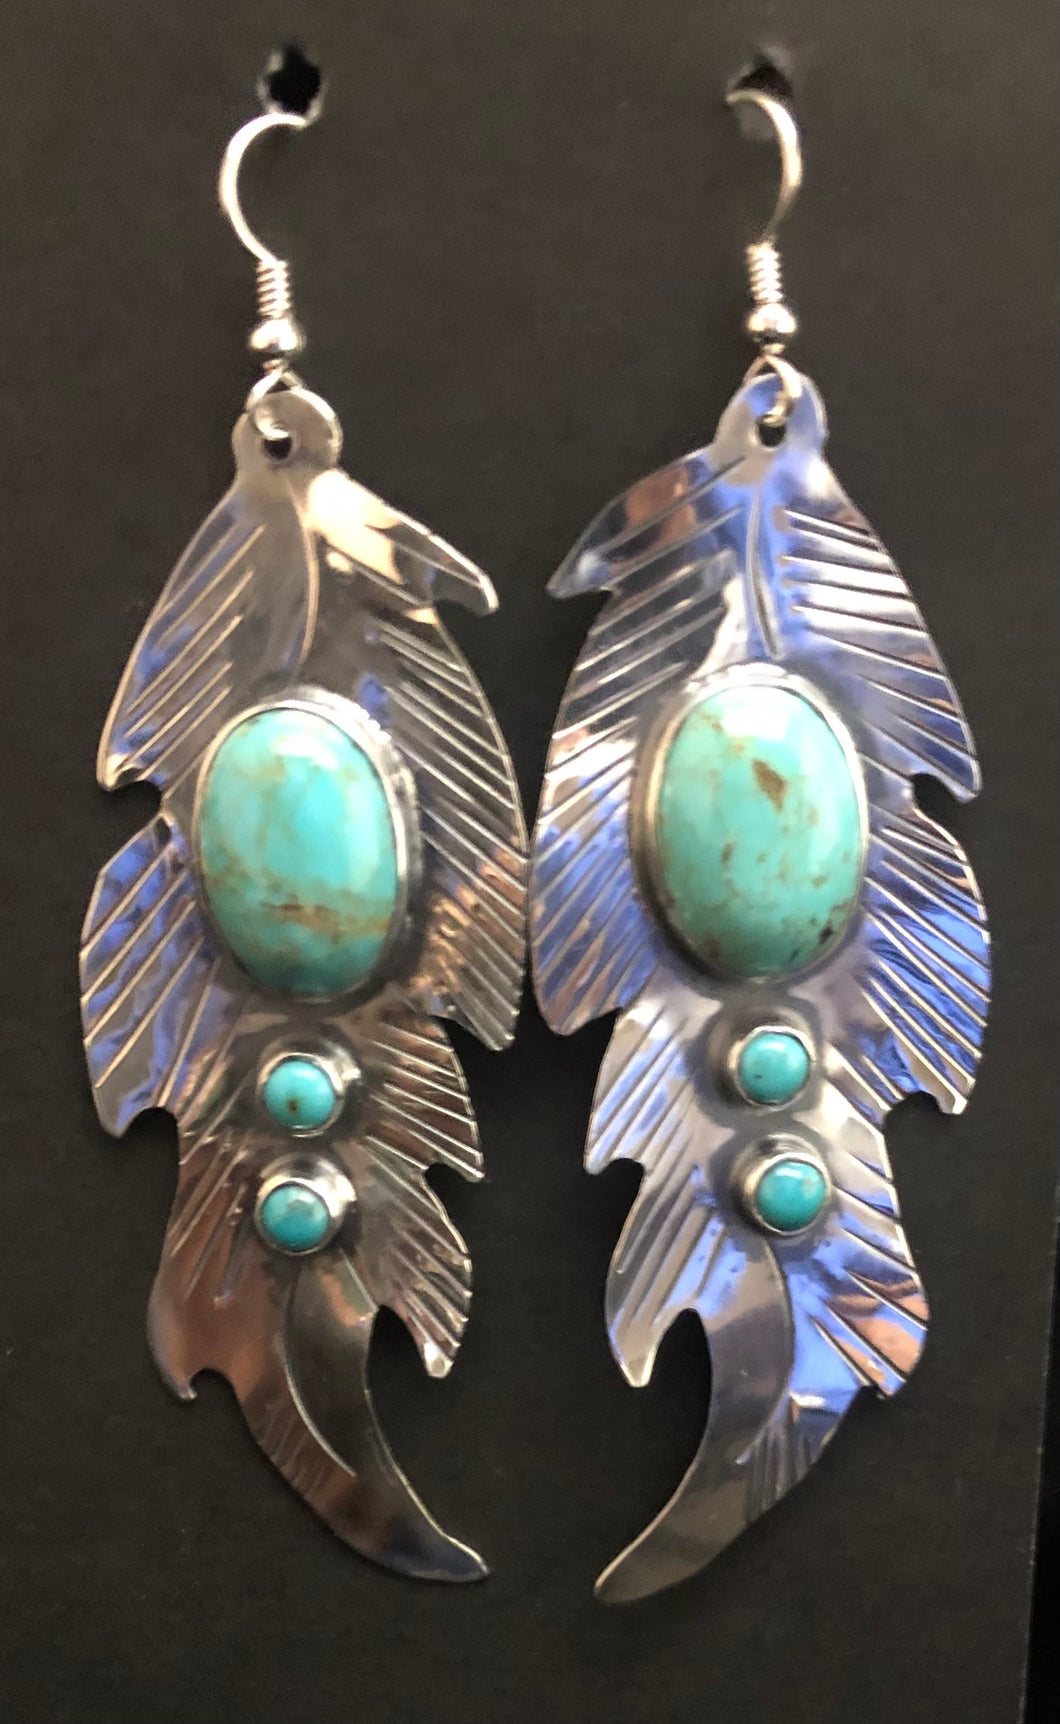 Turquoise Feather Sterling Silver Earrings